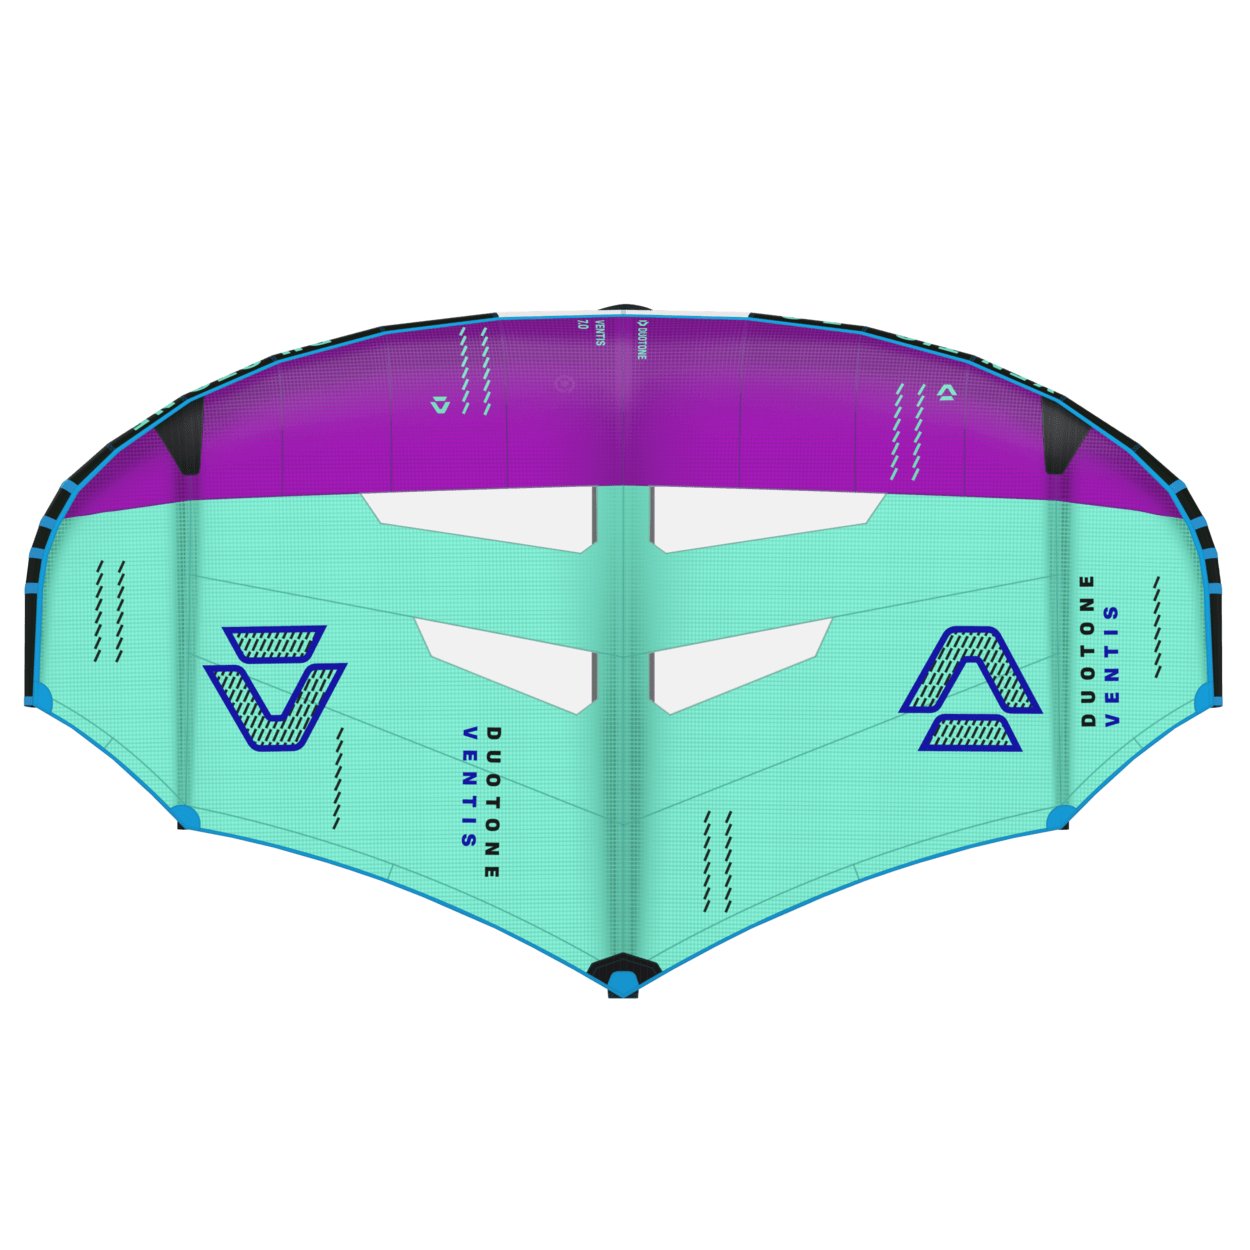 Duotone Foil Wing Ventis 2024 - Worthing Watersports - 9010583182384 - Foilwing - Duotone X